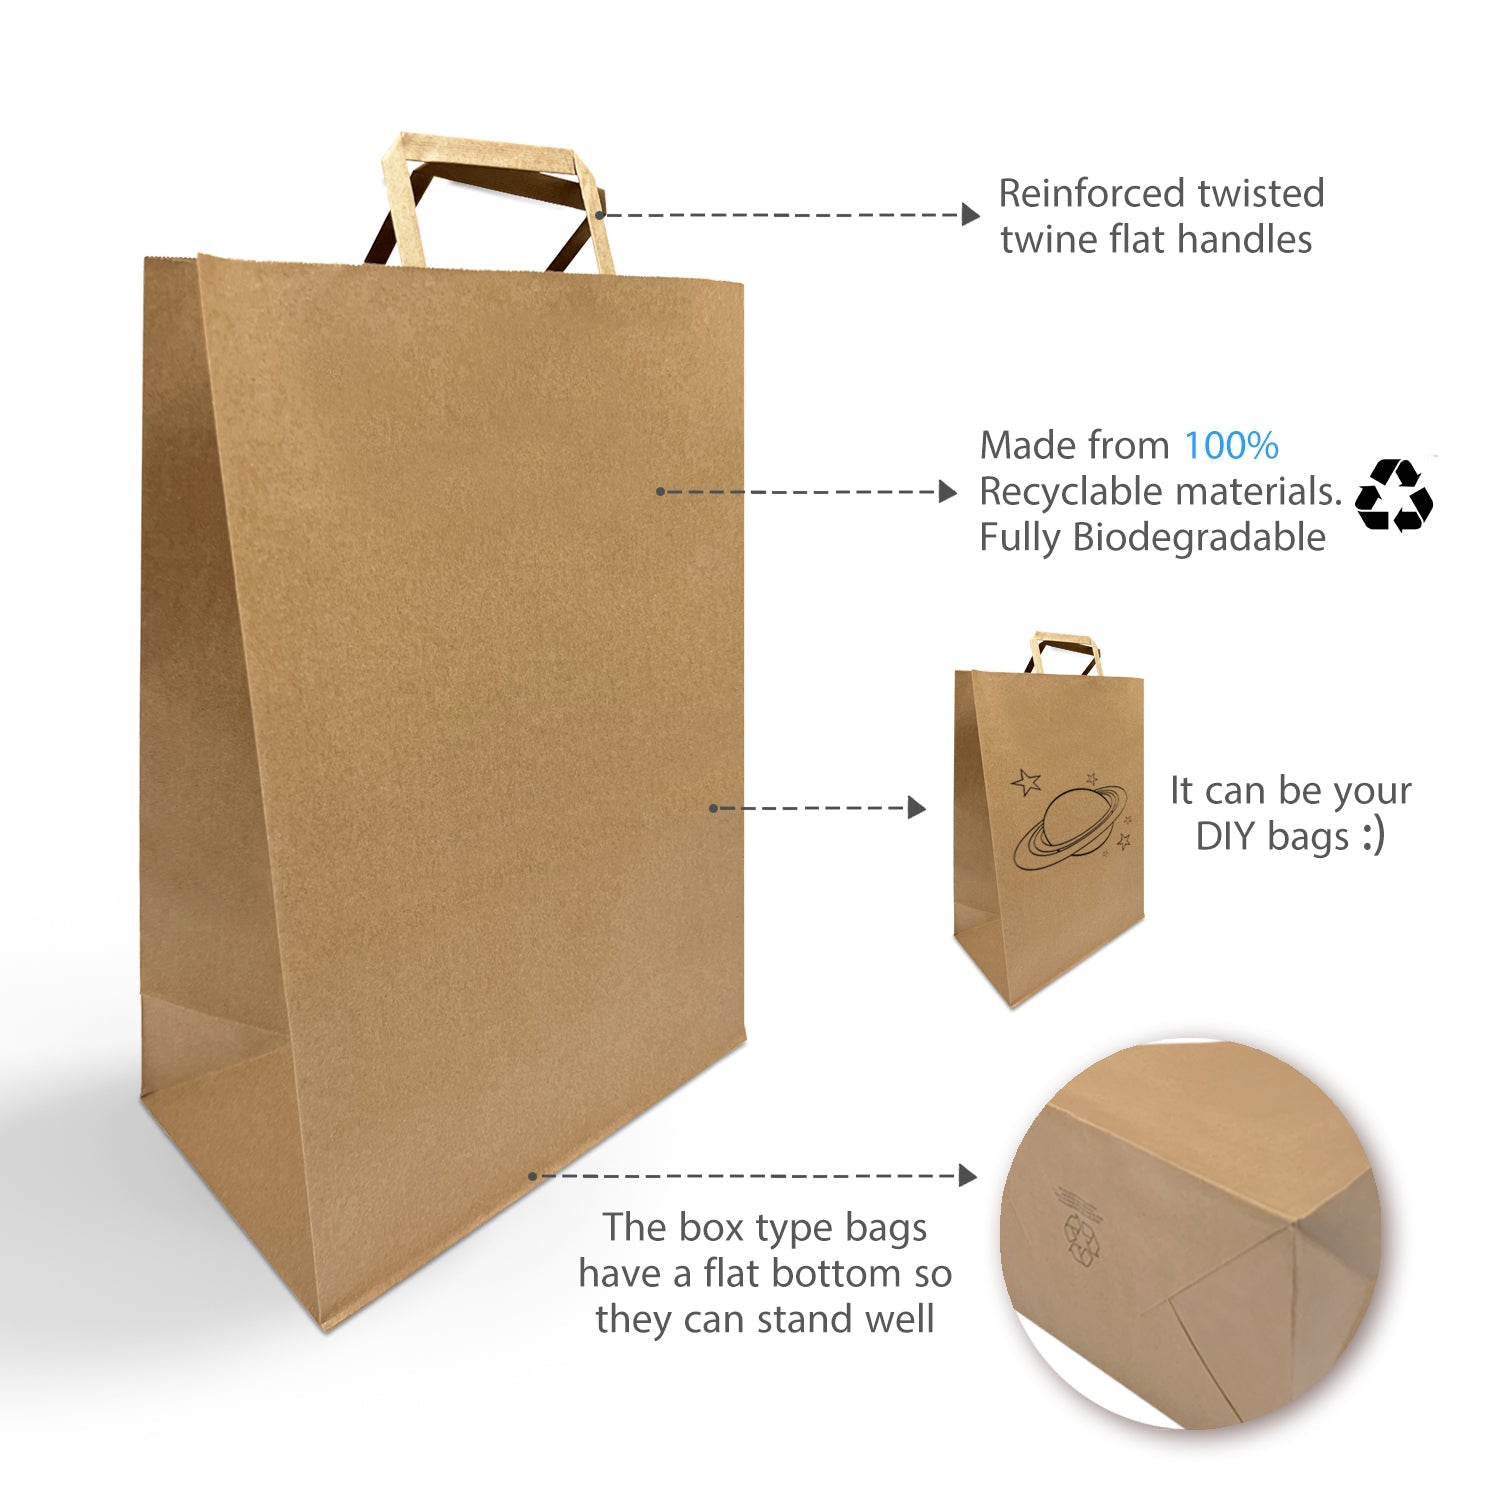 300 Pcs, Simba,  12x7x17 inches, Kraft Paper Bags, with Flat Handle